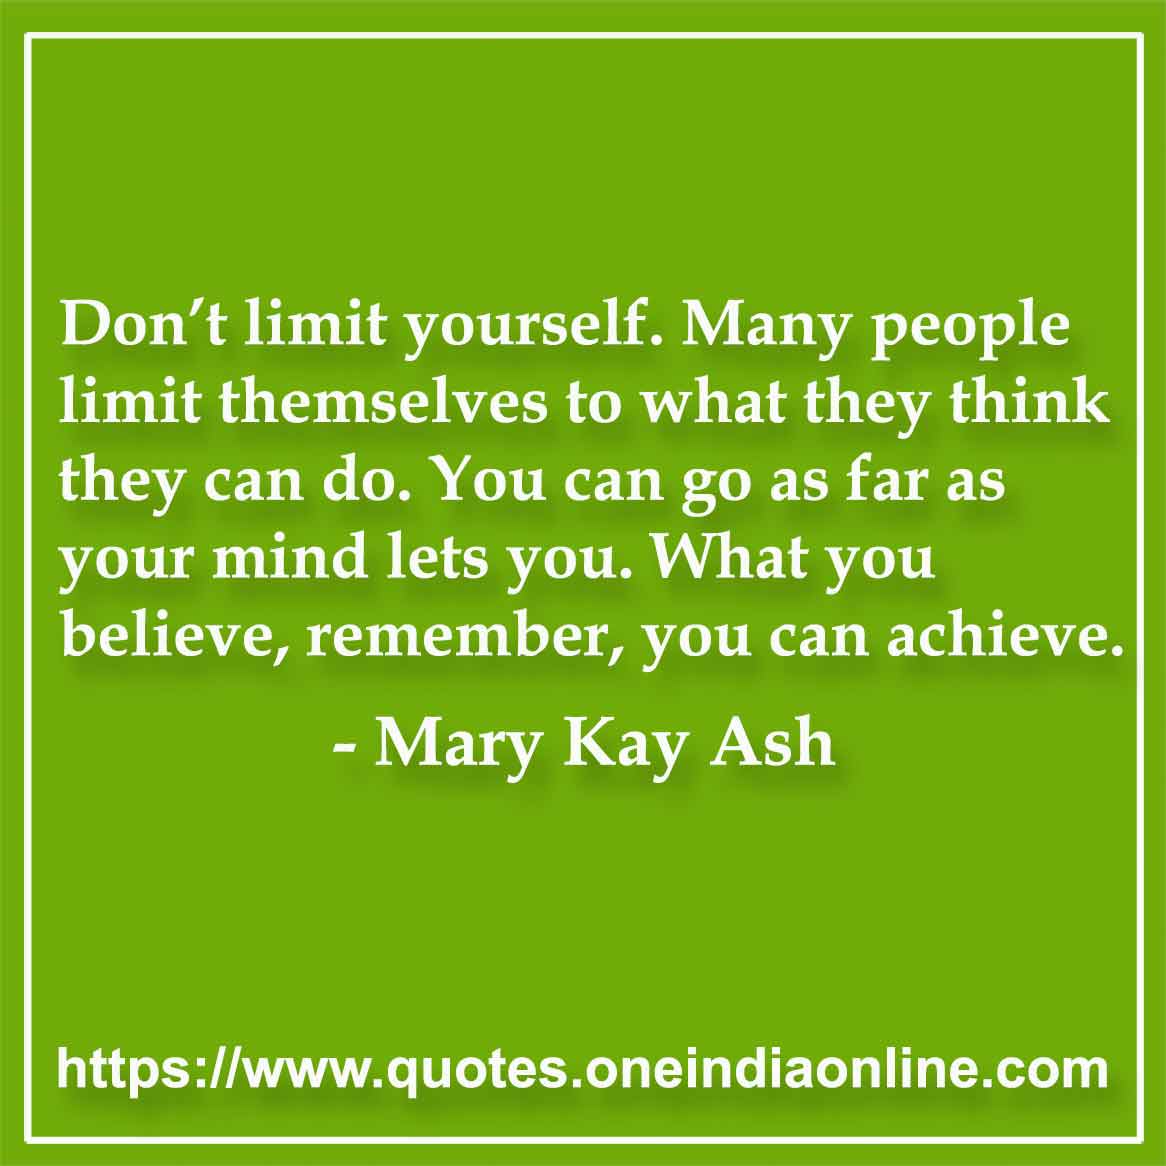 Don’t limit yourself. Many people limit themselves to what they think they can do. You can go as far as your mind lets you. What you believe, remember, you can achieve.

- by Mary Kay Ash